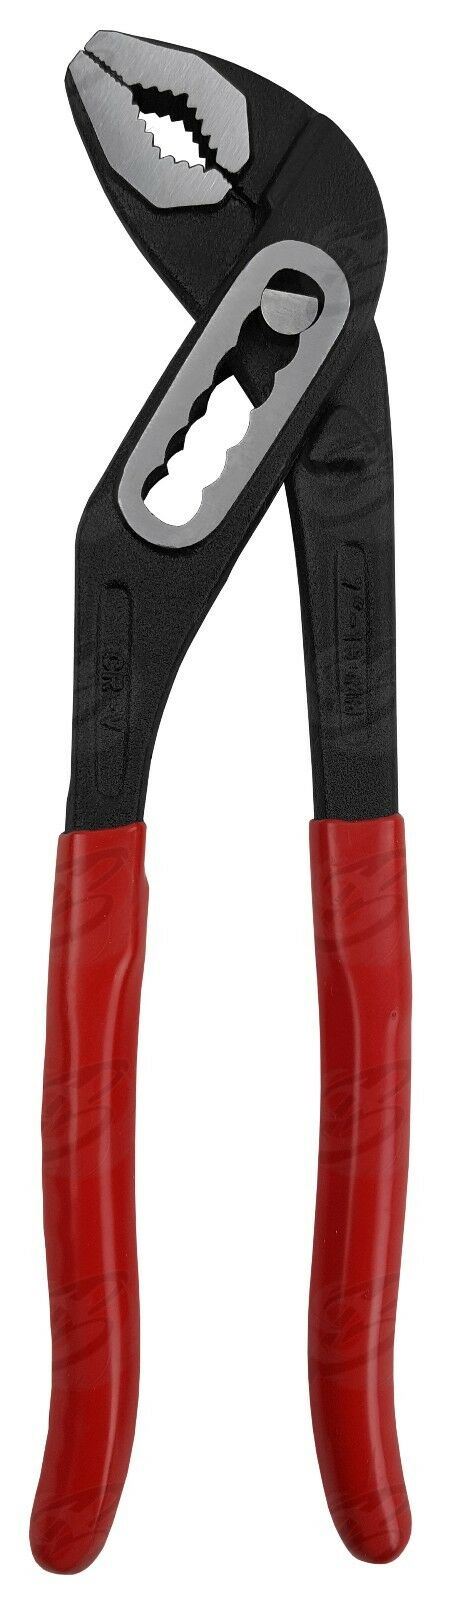 TOOLZONE 7" BOX JOINT WATER PUMP PLIERS